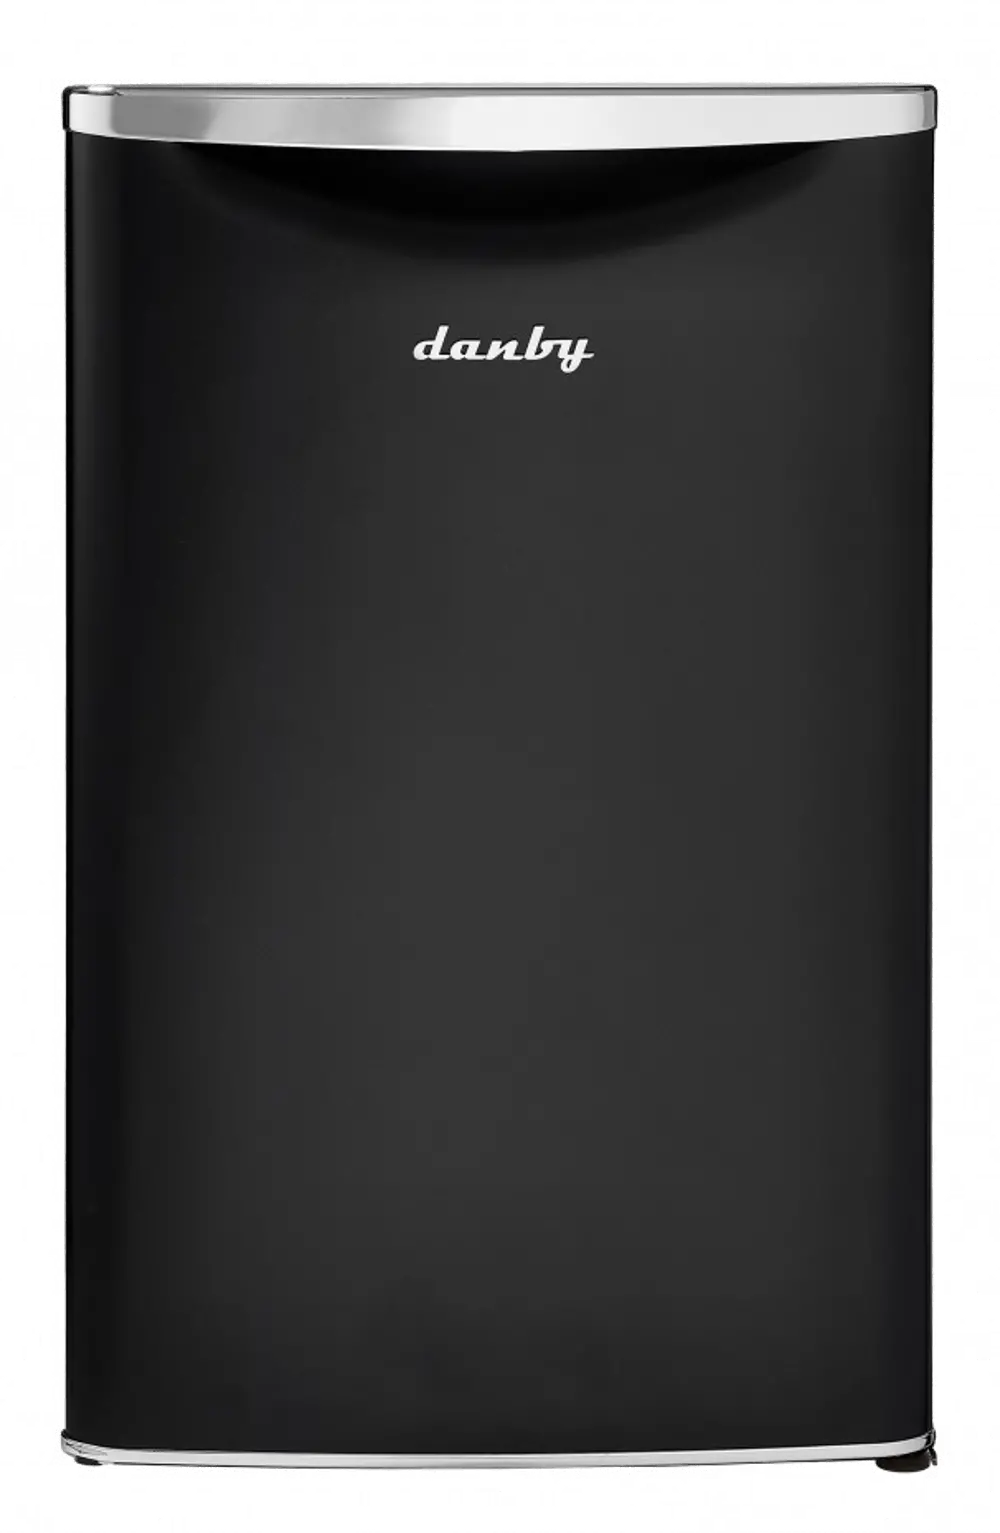 Danby Compact Fridge - 20 Inch Black | RC Willey